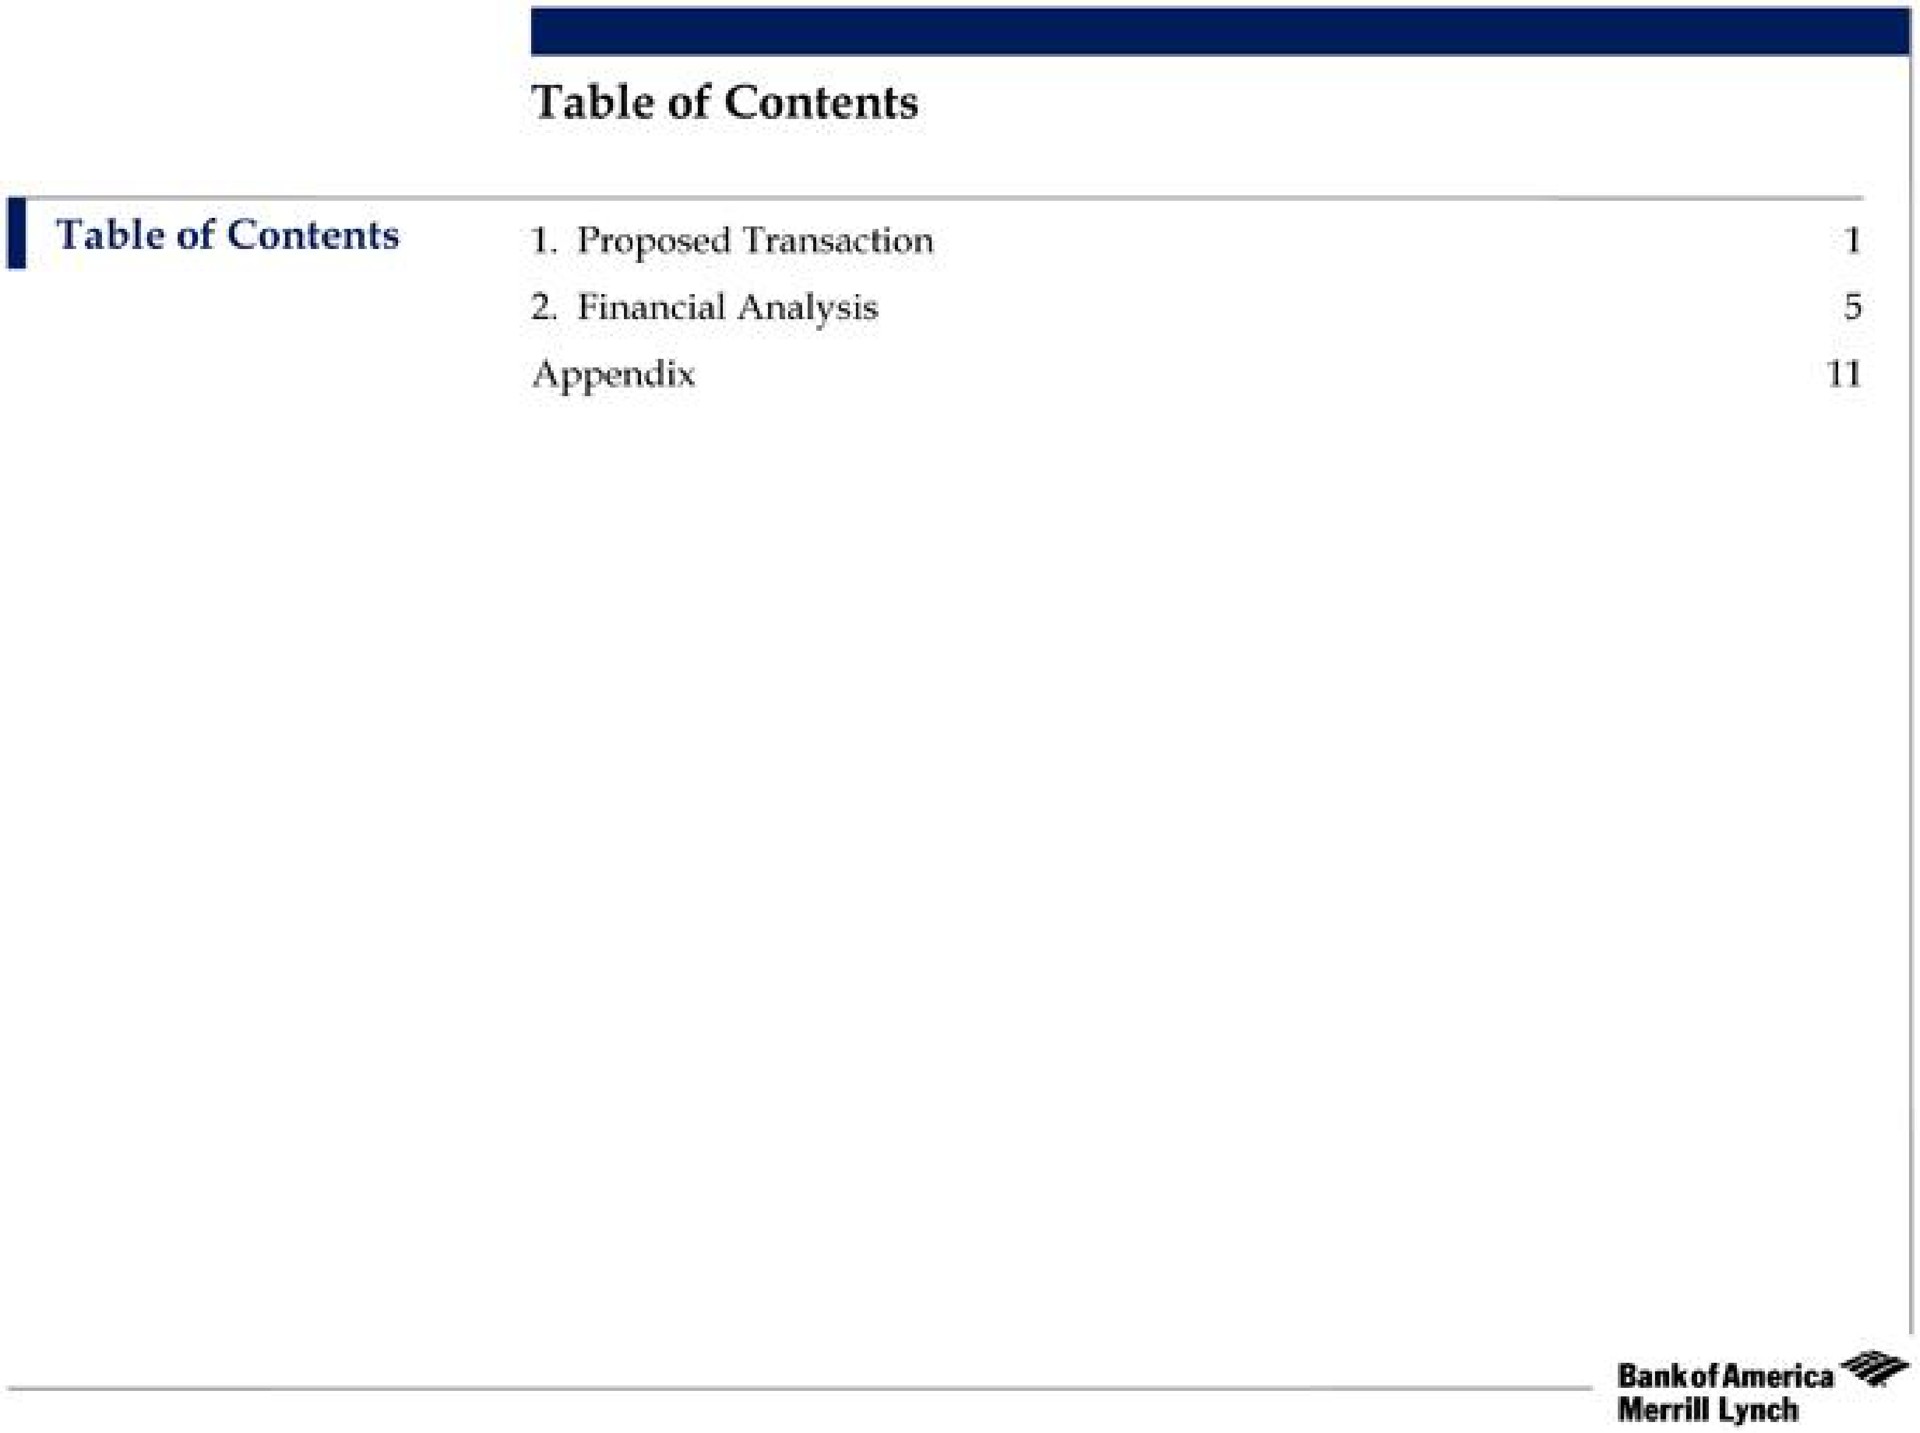 table of contents | Bank of America